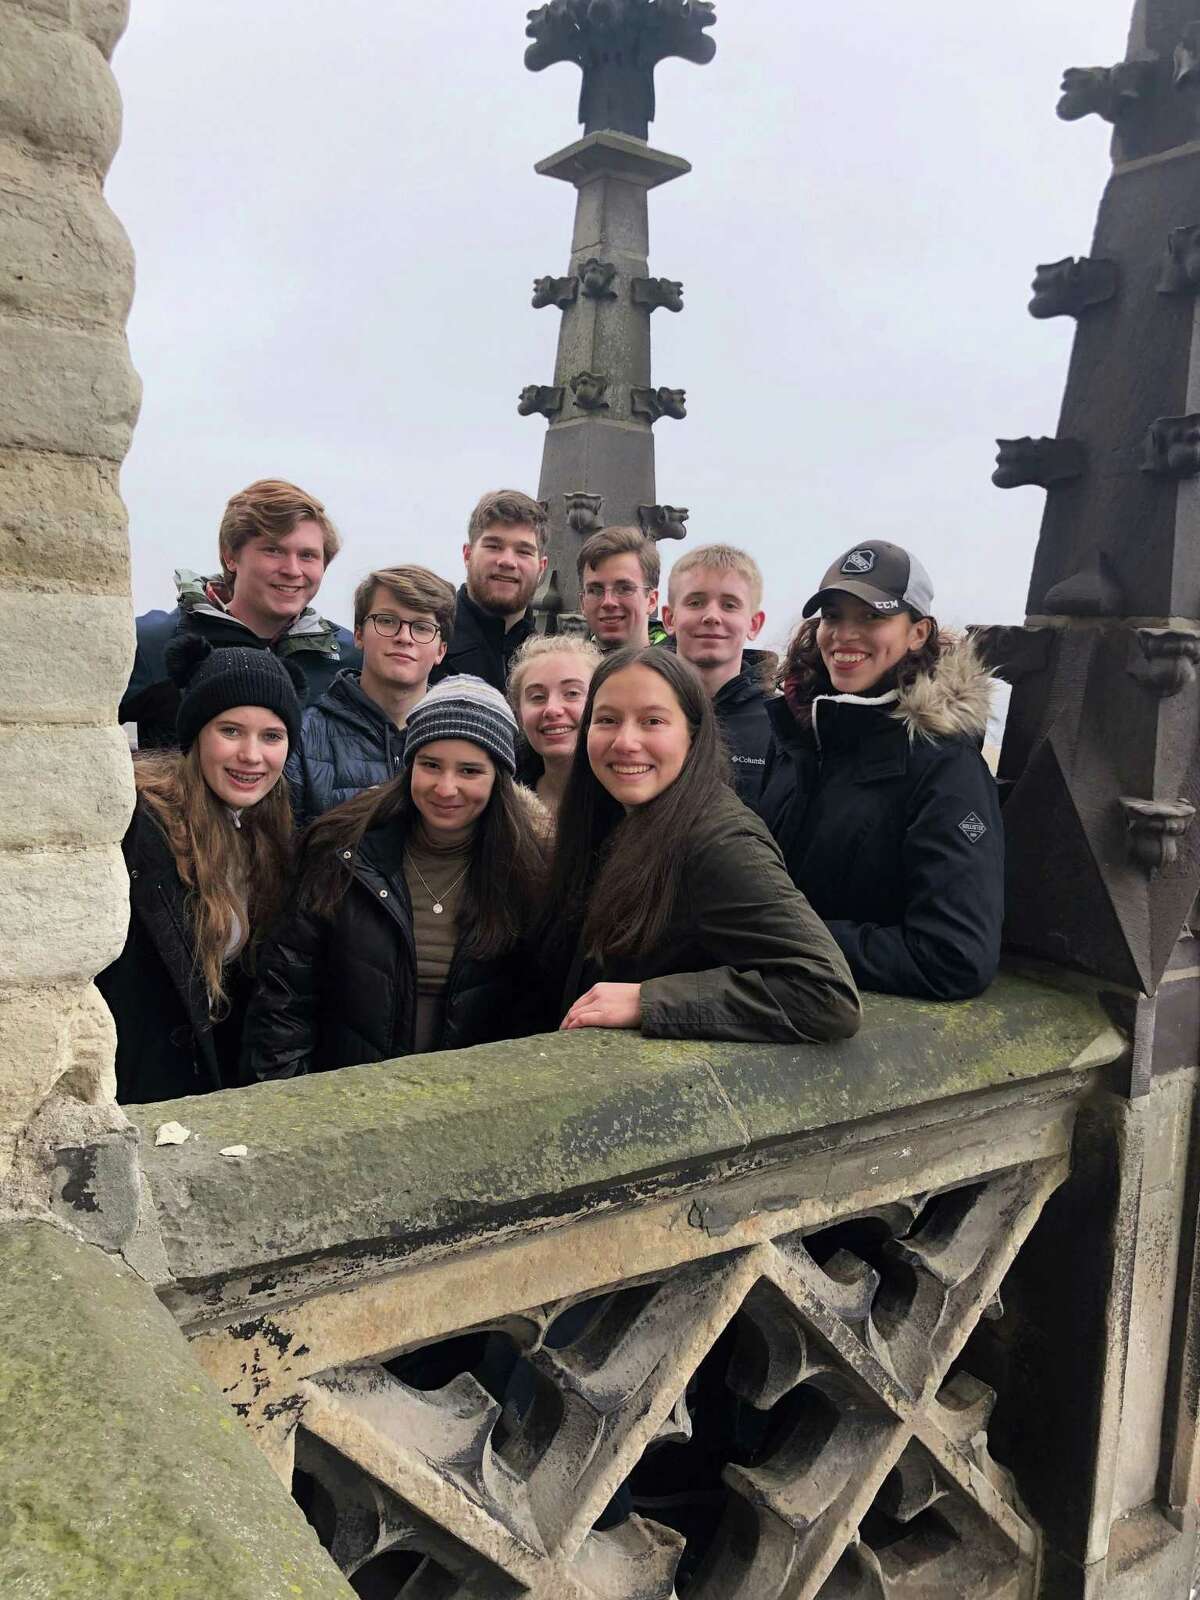 The New Canaan High School students who attended the Model UN, (United Nations), in The Hague were from left to right: Helen Culpepper, Aidan Smith, Dan Tierney, Andrew Zuo, Peter Mason, Garrett Ladley, Hannah Swimm, Andrew Morse, Valentina Zamora, Alexa Madrid, Elizabeth Dolan, and Isabelle Fernandez. They were in the Netherlands in January 2020. This letter writer writes about a previous time when teachers in New Canaan Public Schools were diverse, while also giving his opinion about an experience.